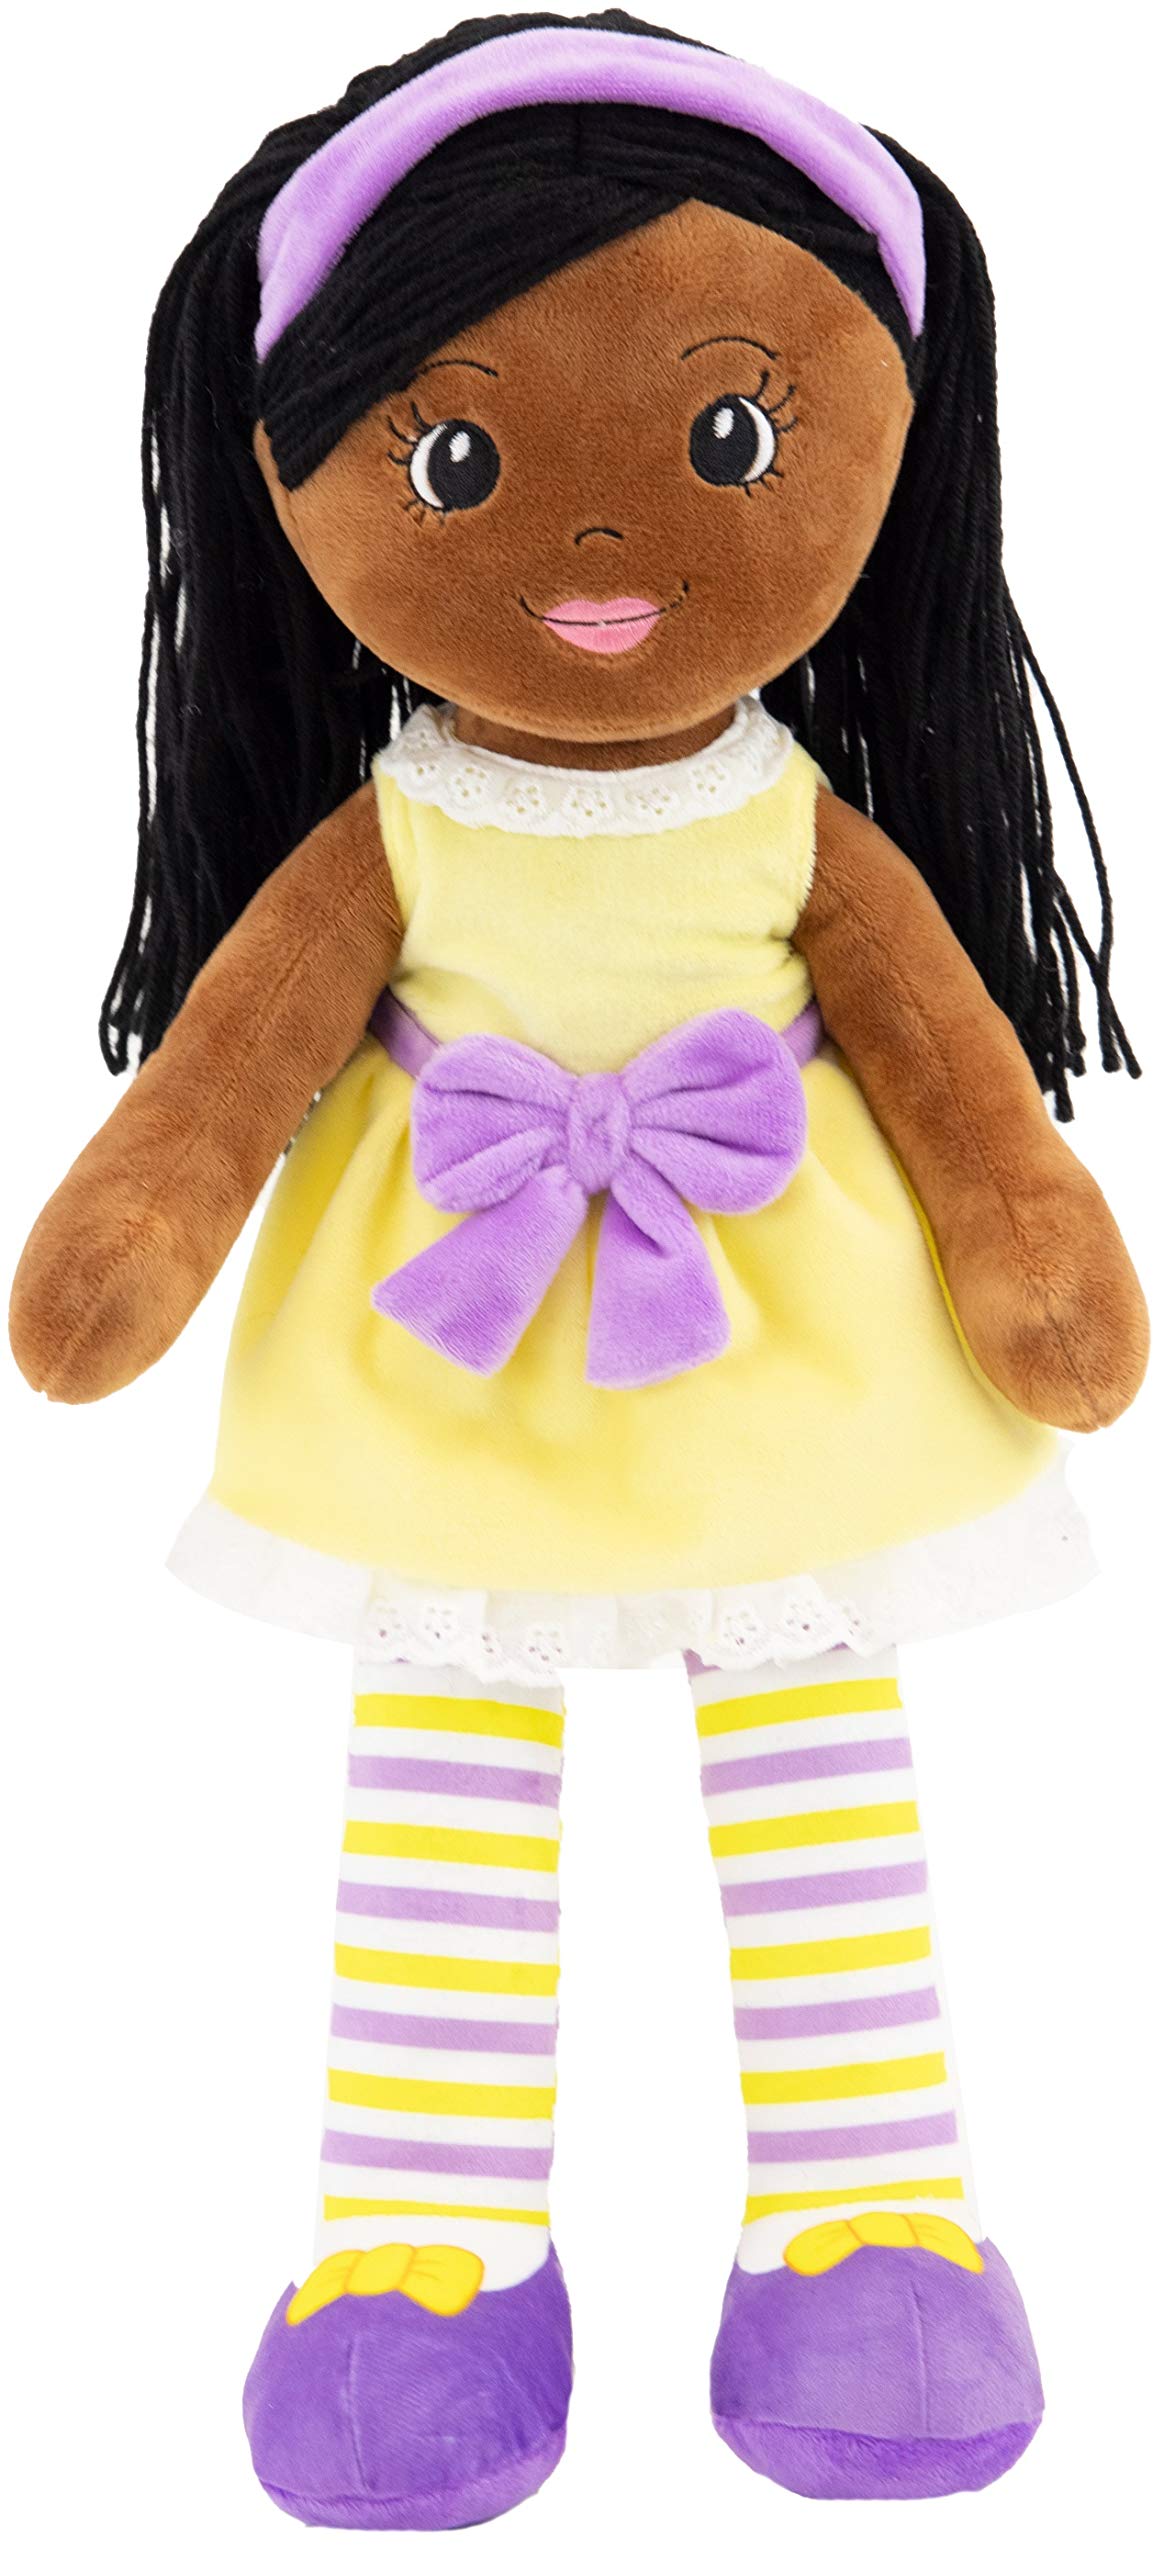 PLUSHIBLE BRIDGING M Plushible Plush Baby Doll - 18 Inch African American Rag Dolls for girls, Infants, Toddlers, & Babies - Babys My First Soft Fabr